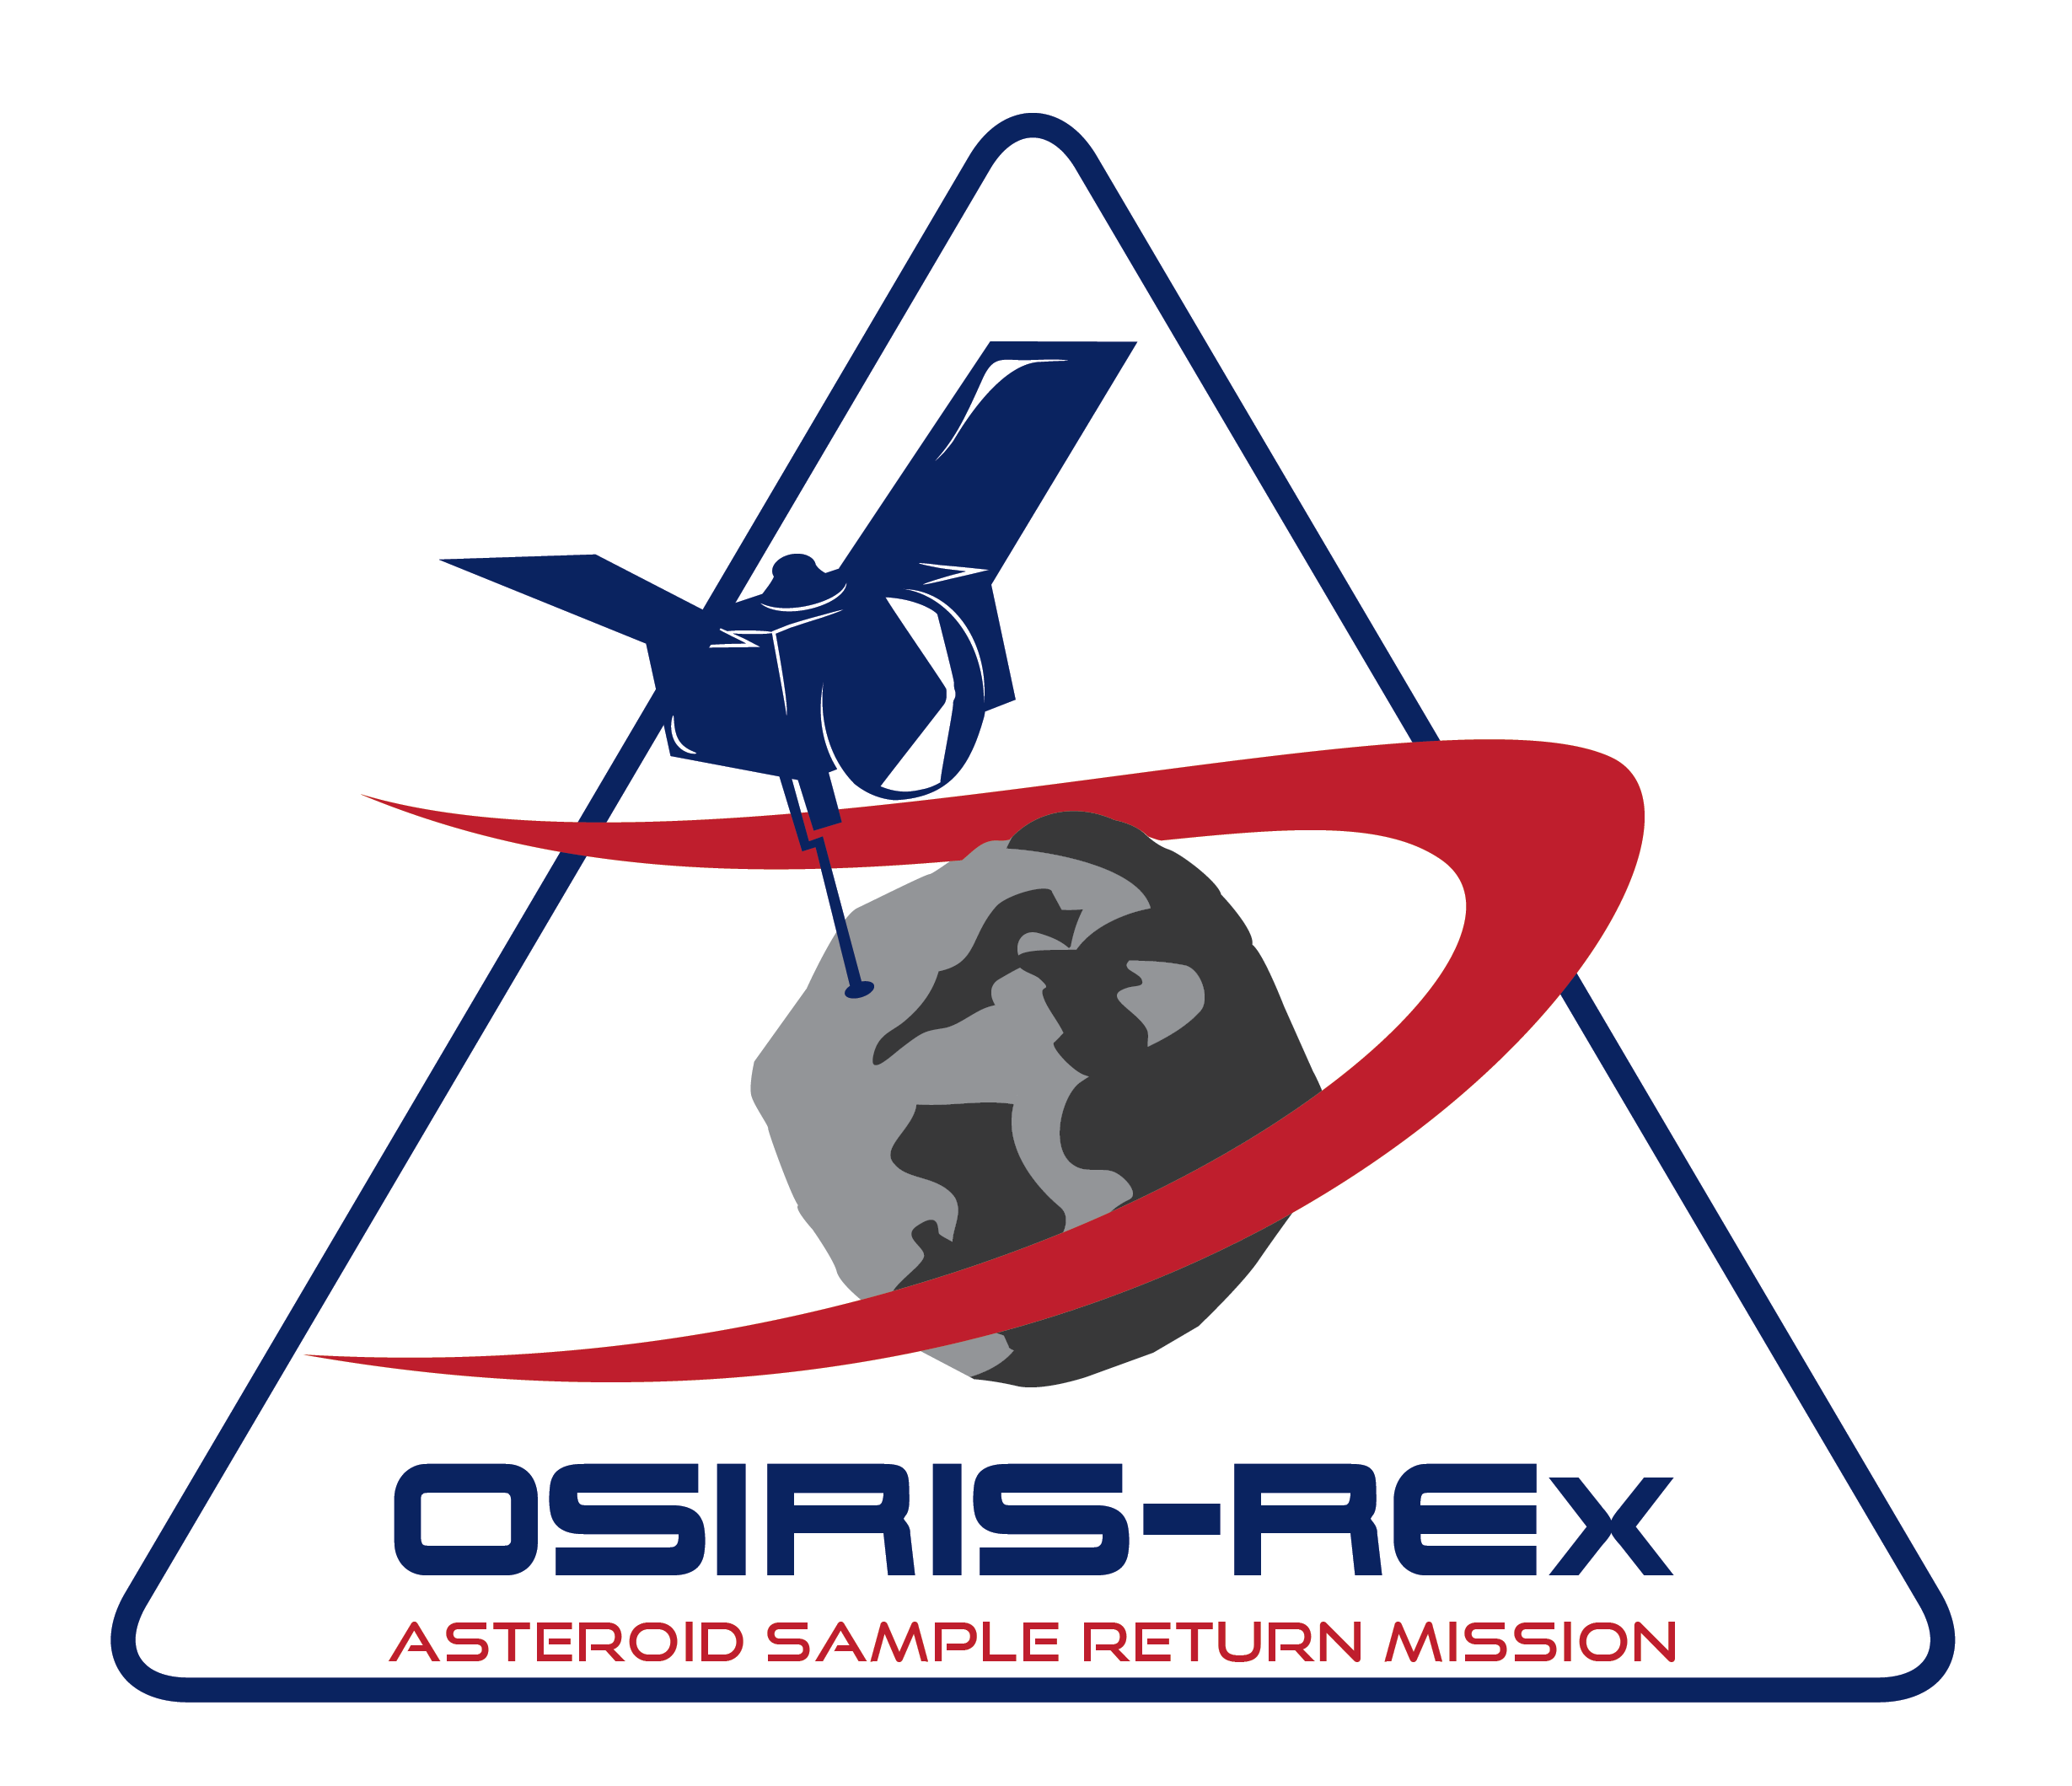 Triangular OSIRIS-REx logo; Illustration of probe landing on an asteroid with a red curvy line detail.